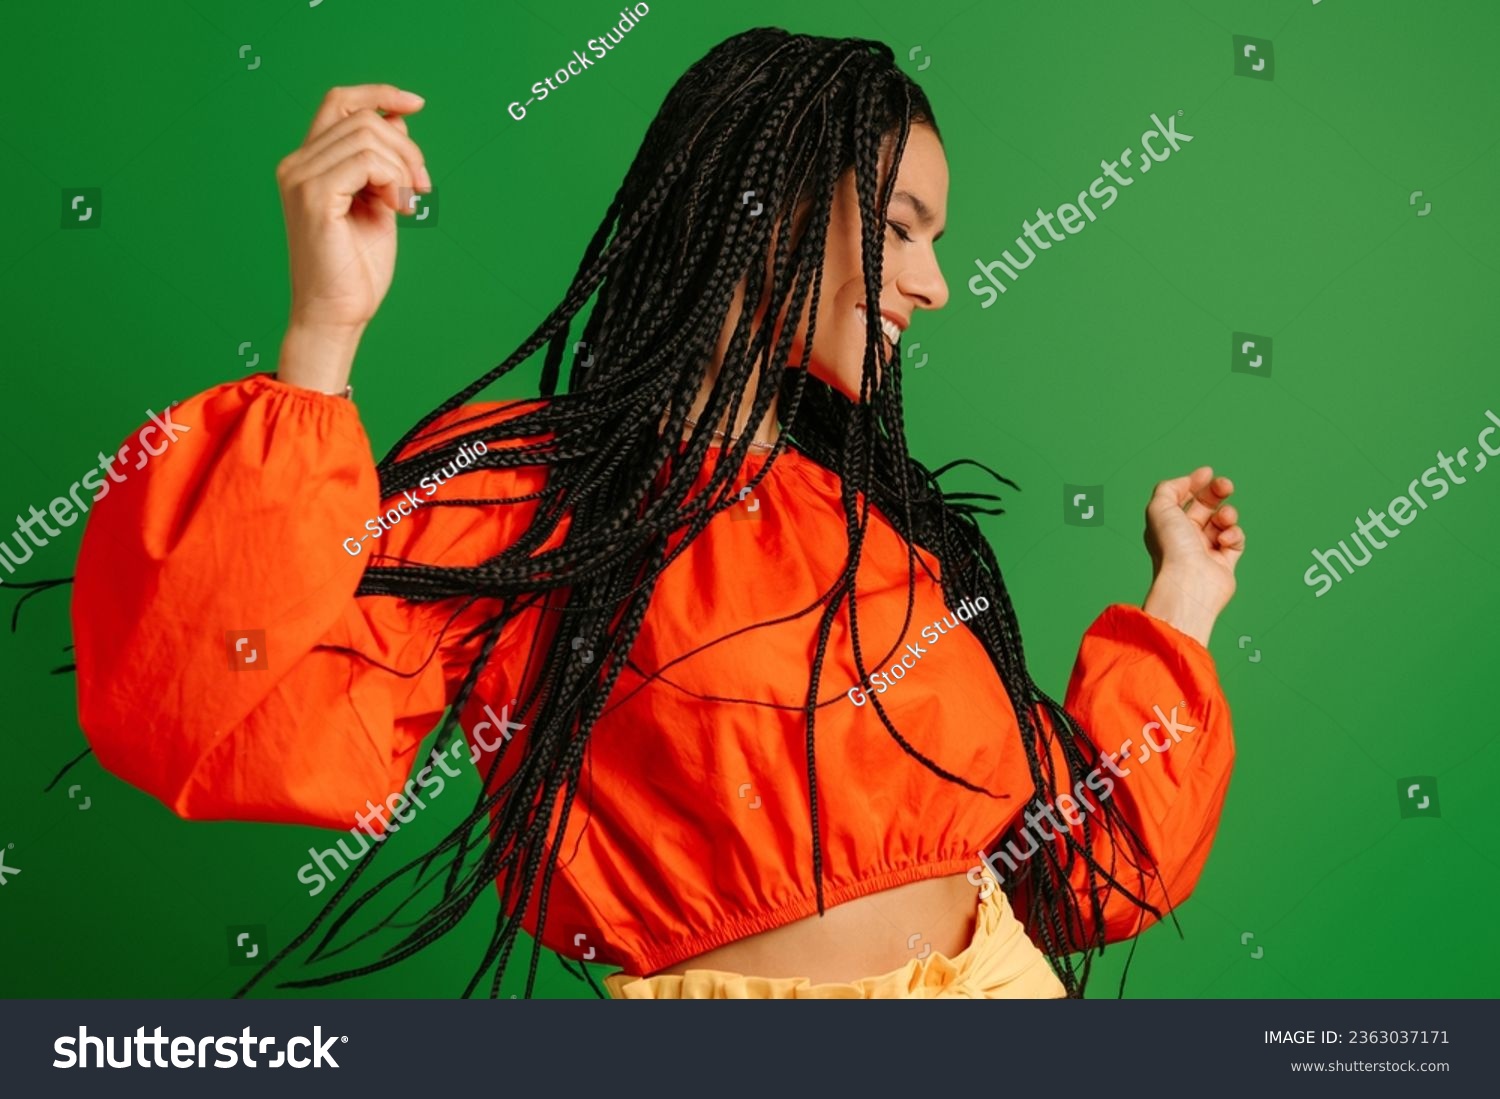 Happy young woman with dreadlocs dancing and smiling against green background #2363037171